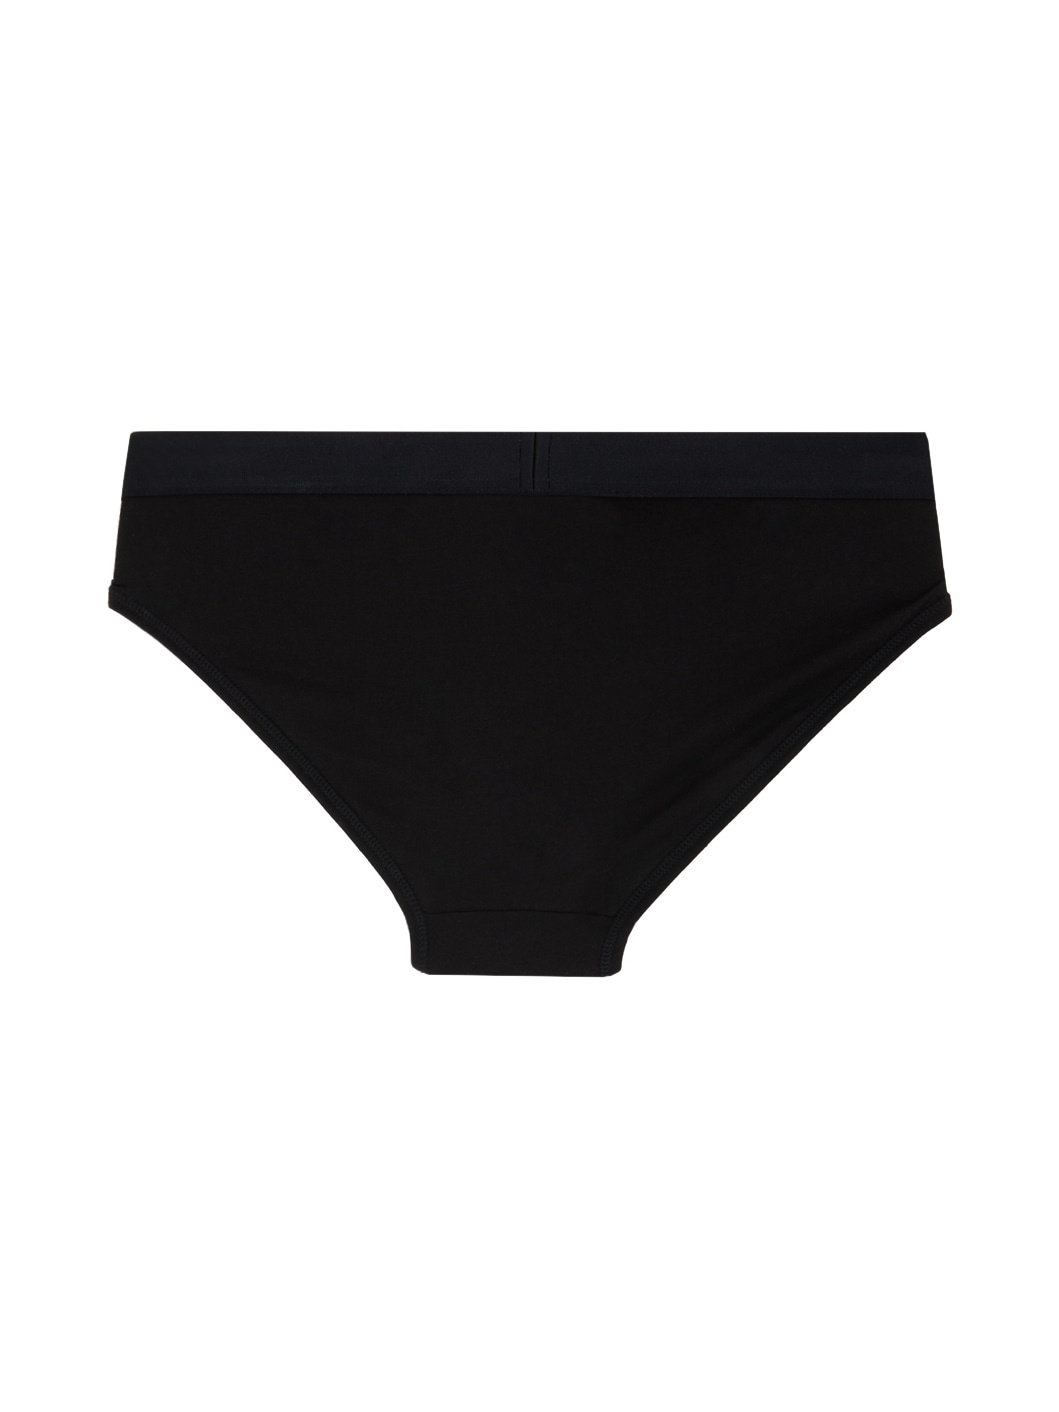 Two-Pack Black Briefs - 3